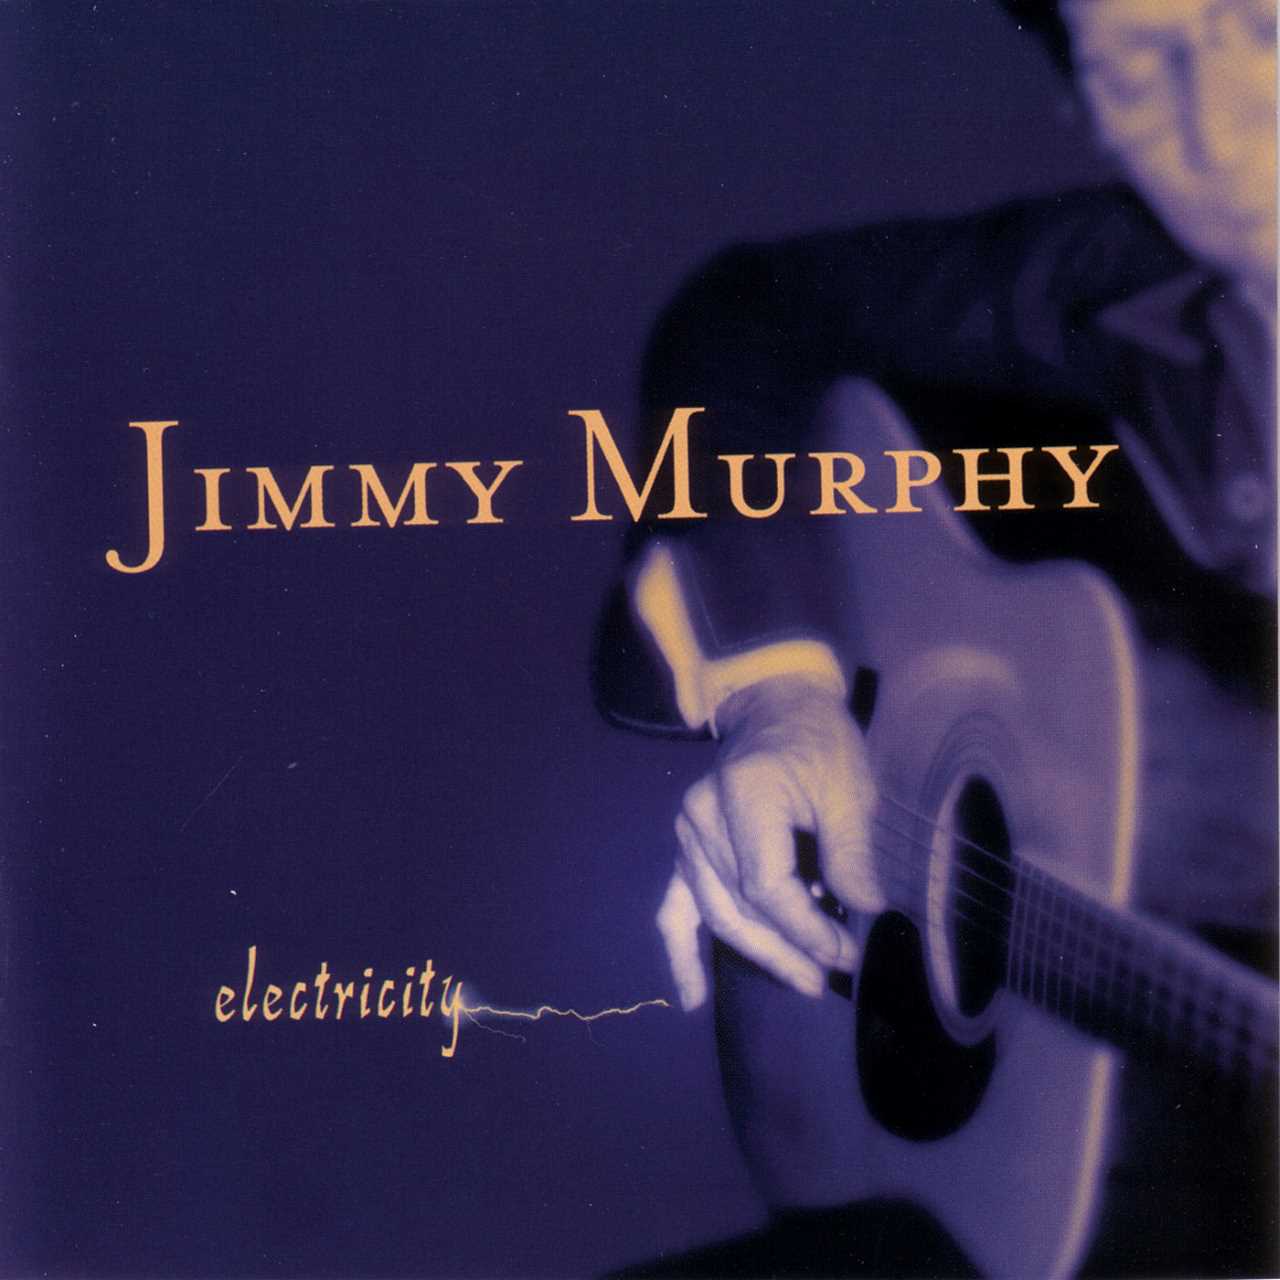 Jimmy Murphy - Electricity cover album